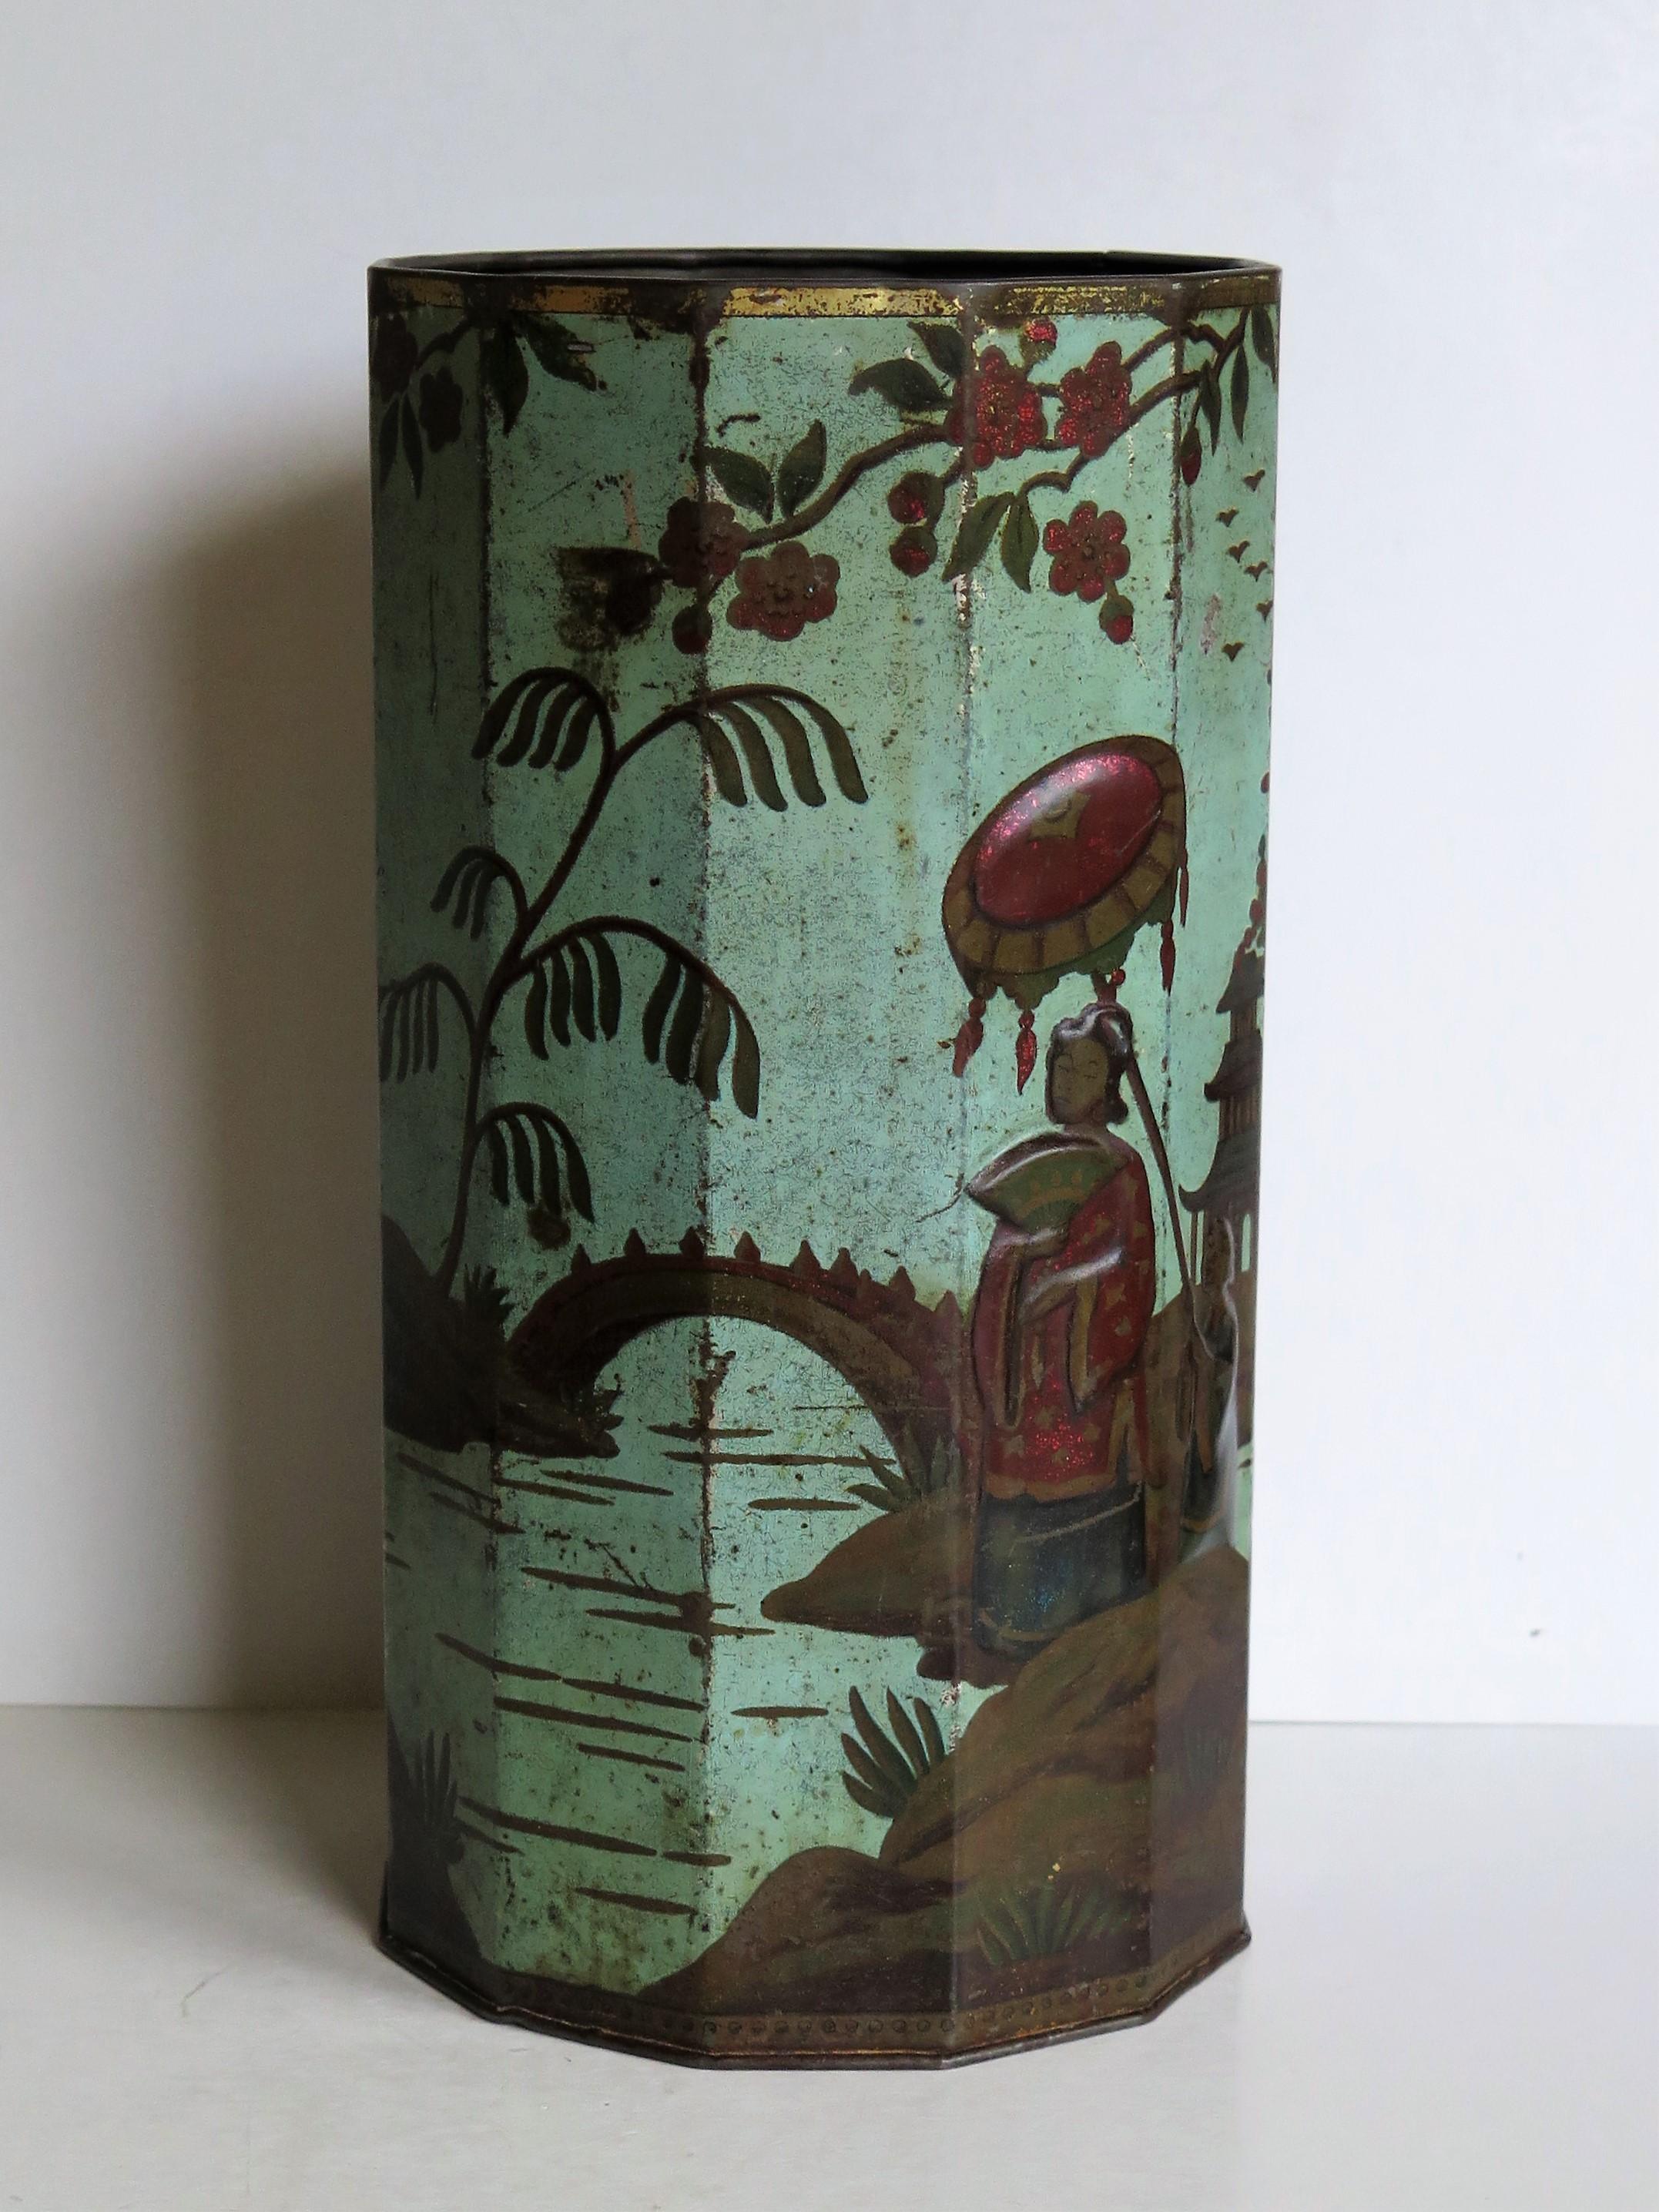 Pressed Late 19th Century Tin Container or Bin with Colored Oriental Figure Scene